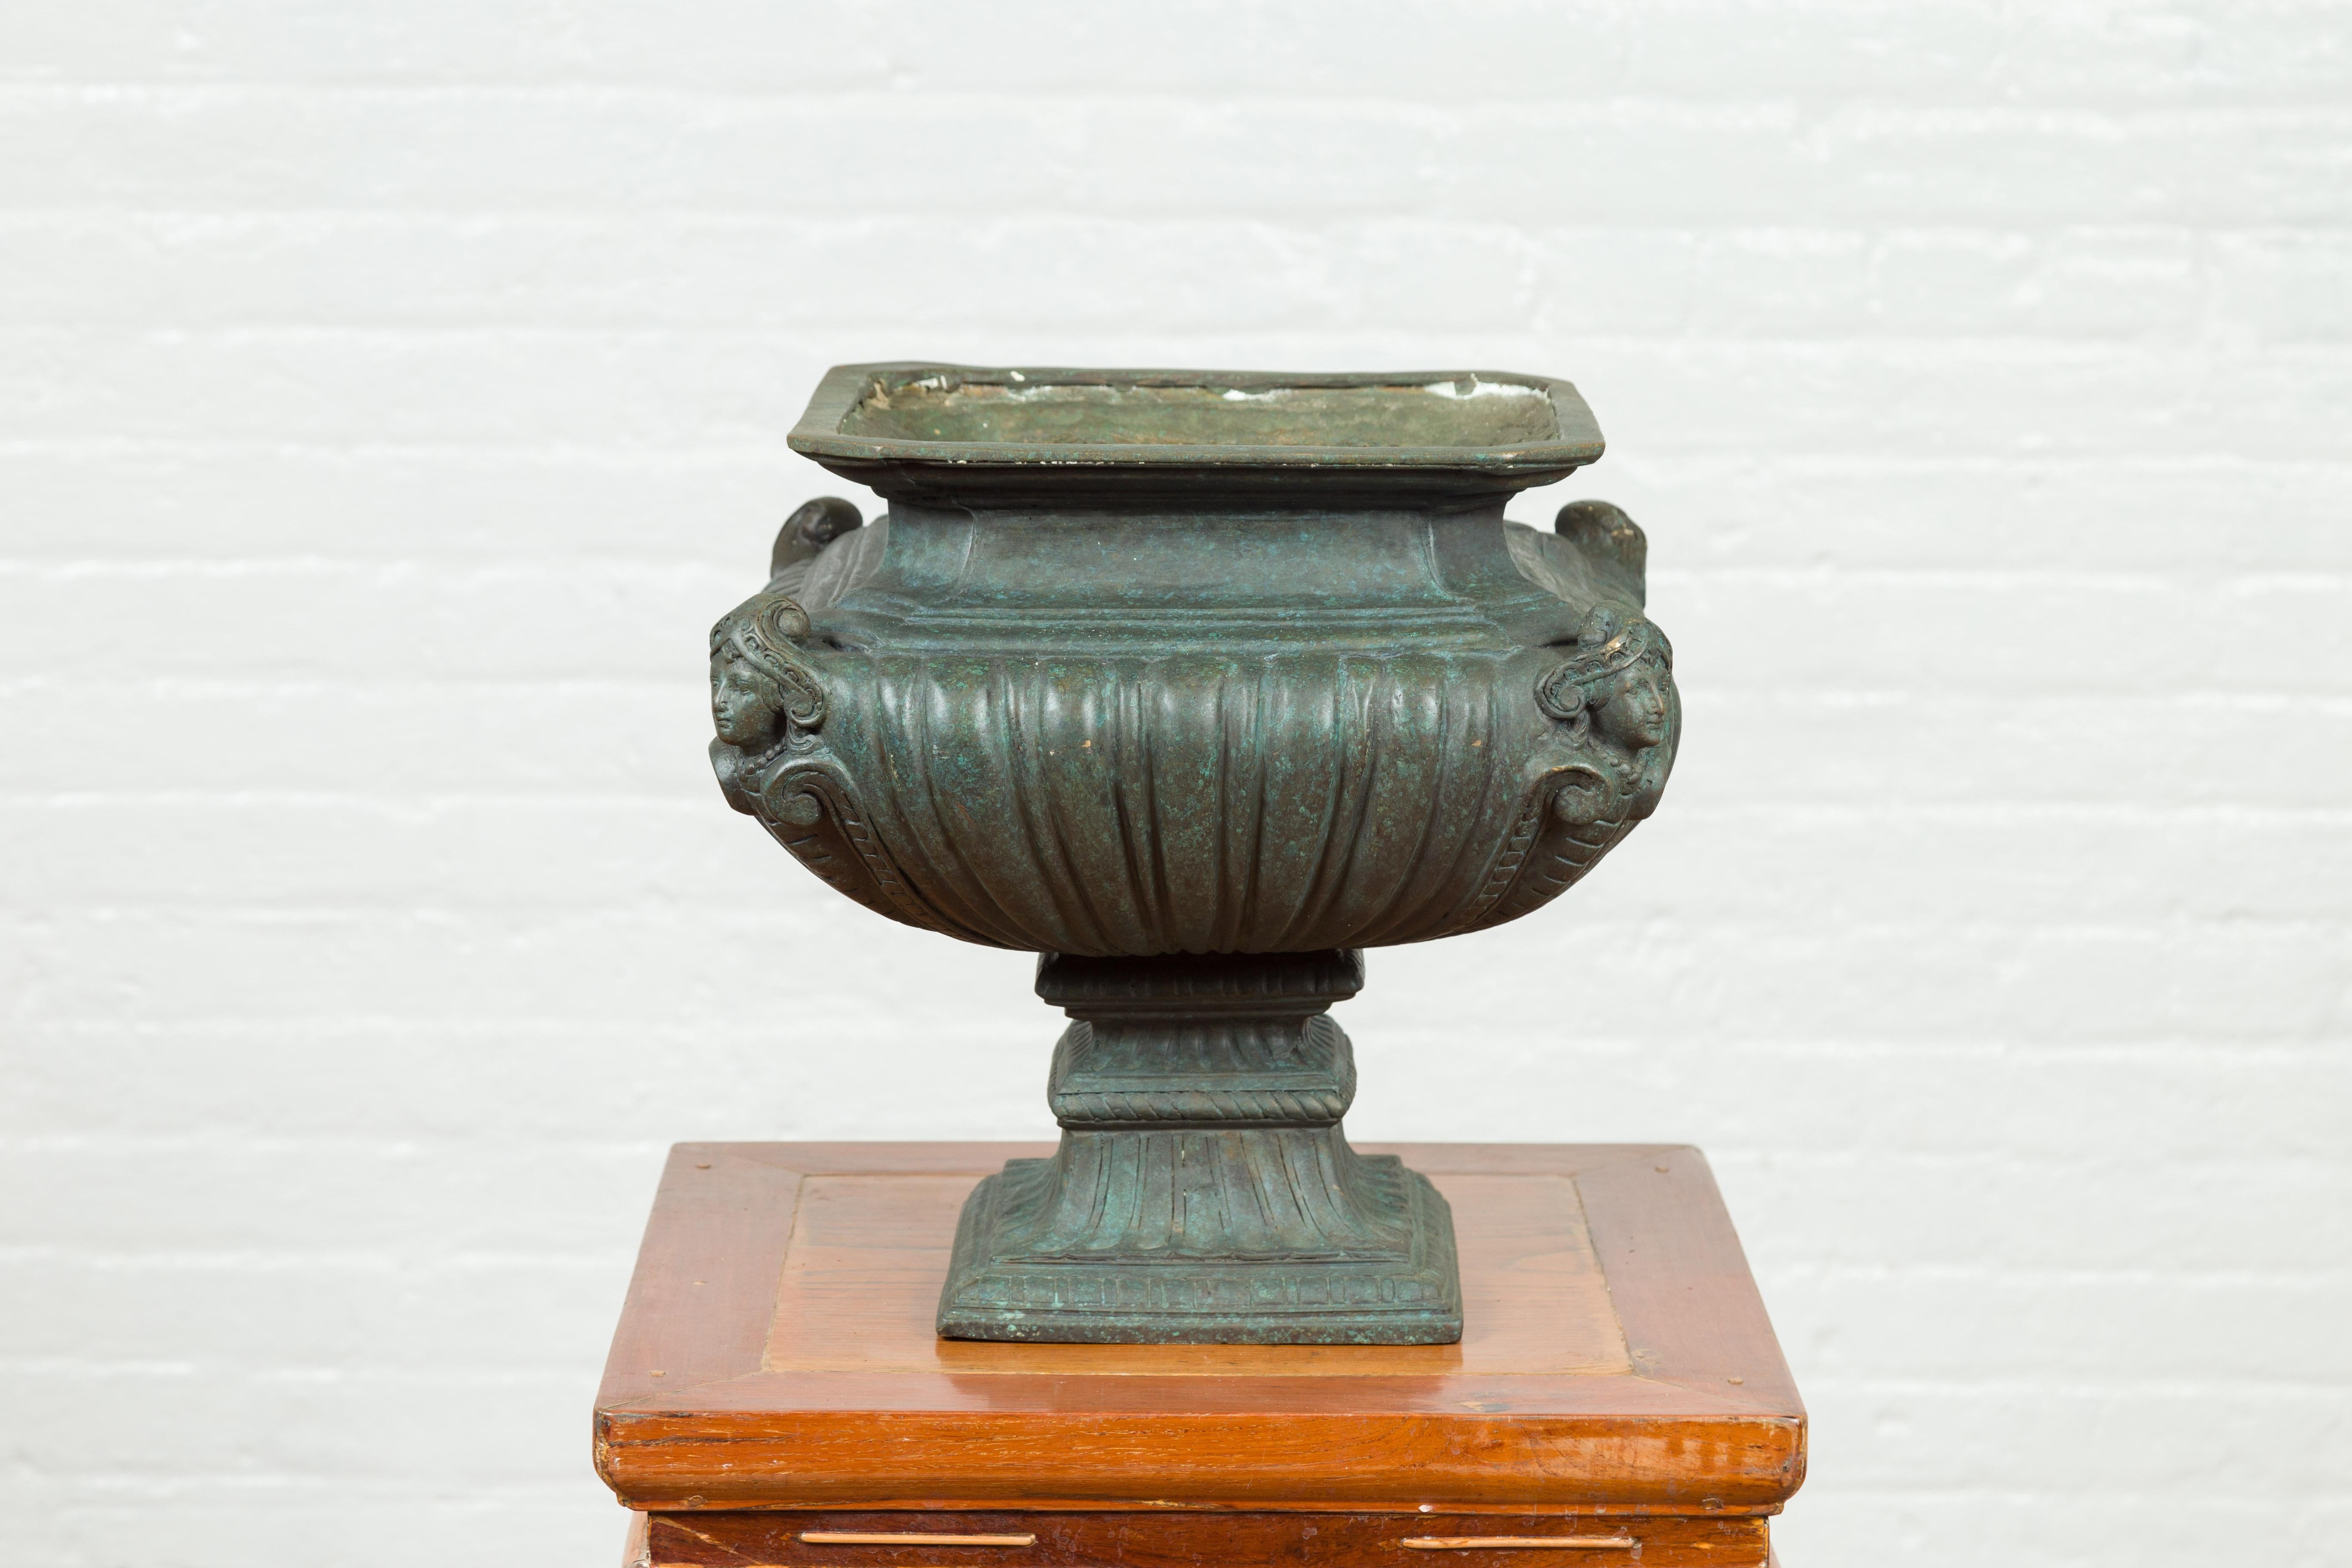 Contemporary Cast Bronze Planter with Figures, Gadroon Motifs and Verde Patina For Sale 7